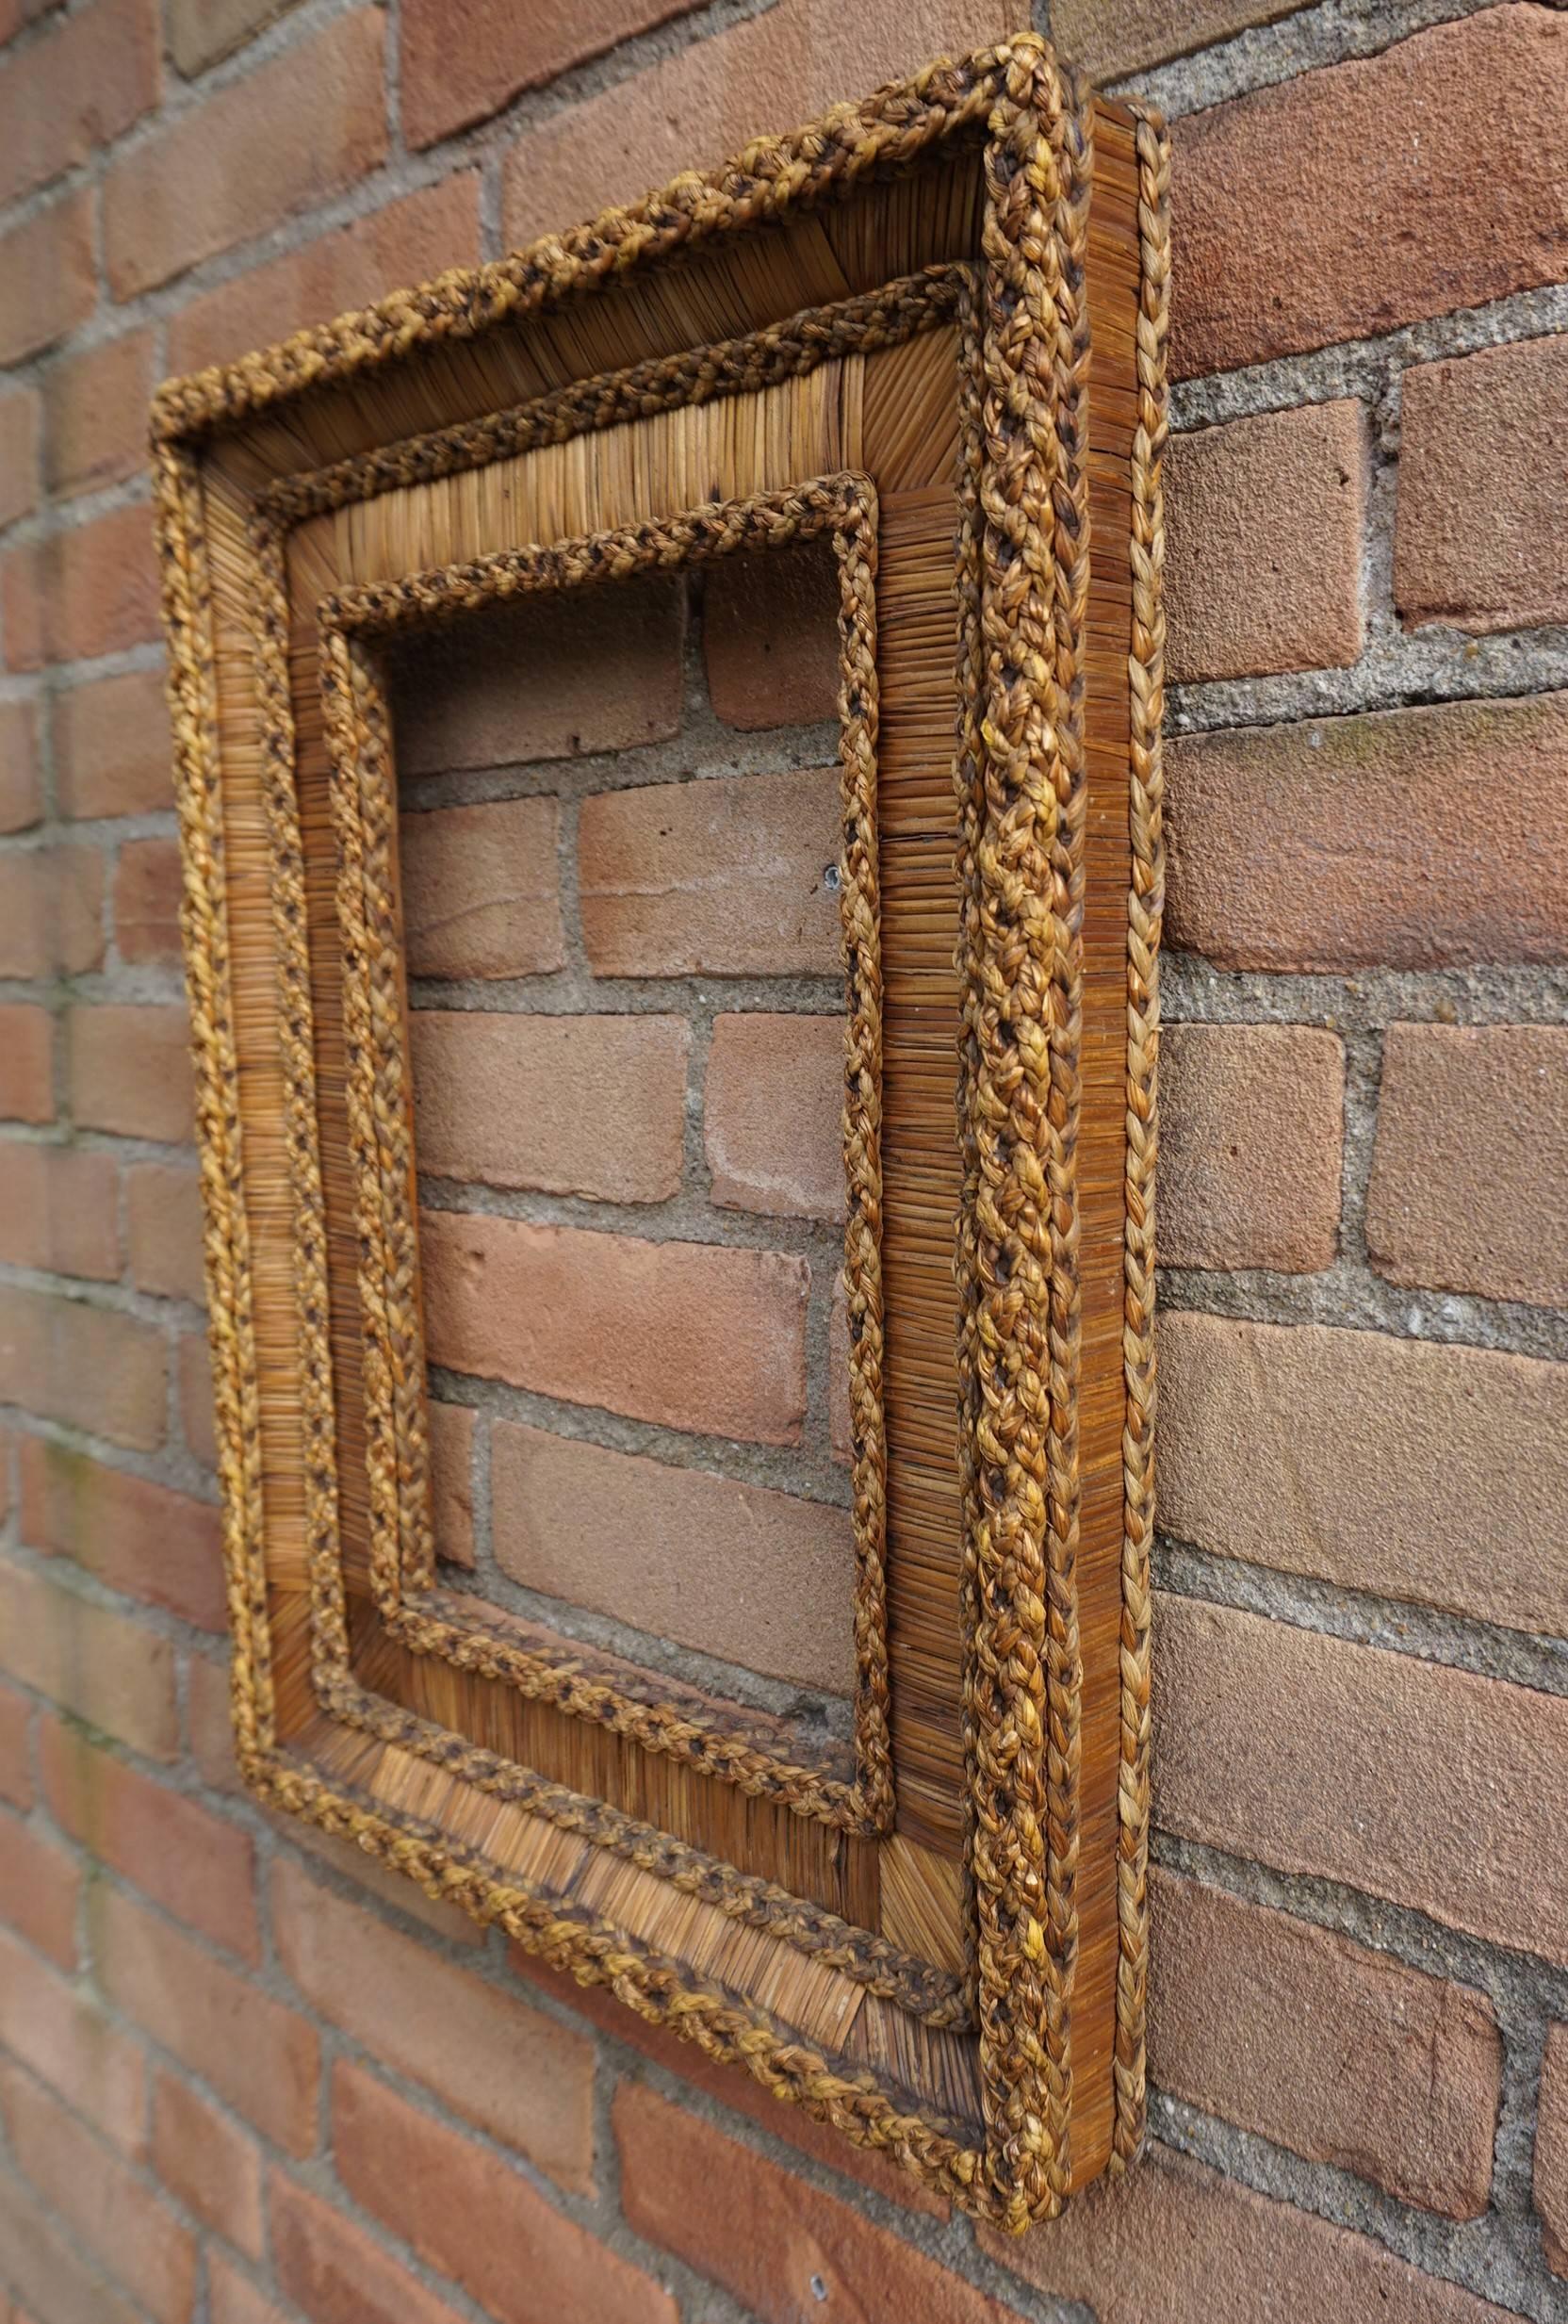 Hand-Crafted Vintage Hand-Woven Straw on Wood, Stylishly Organic Picture or Mirror Frame 